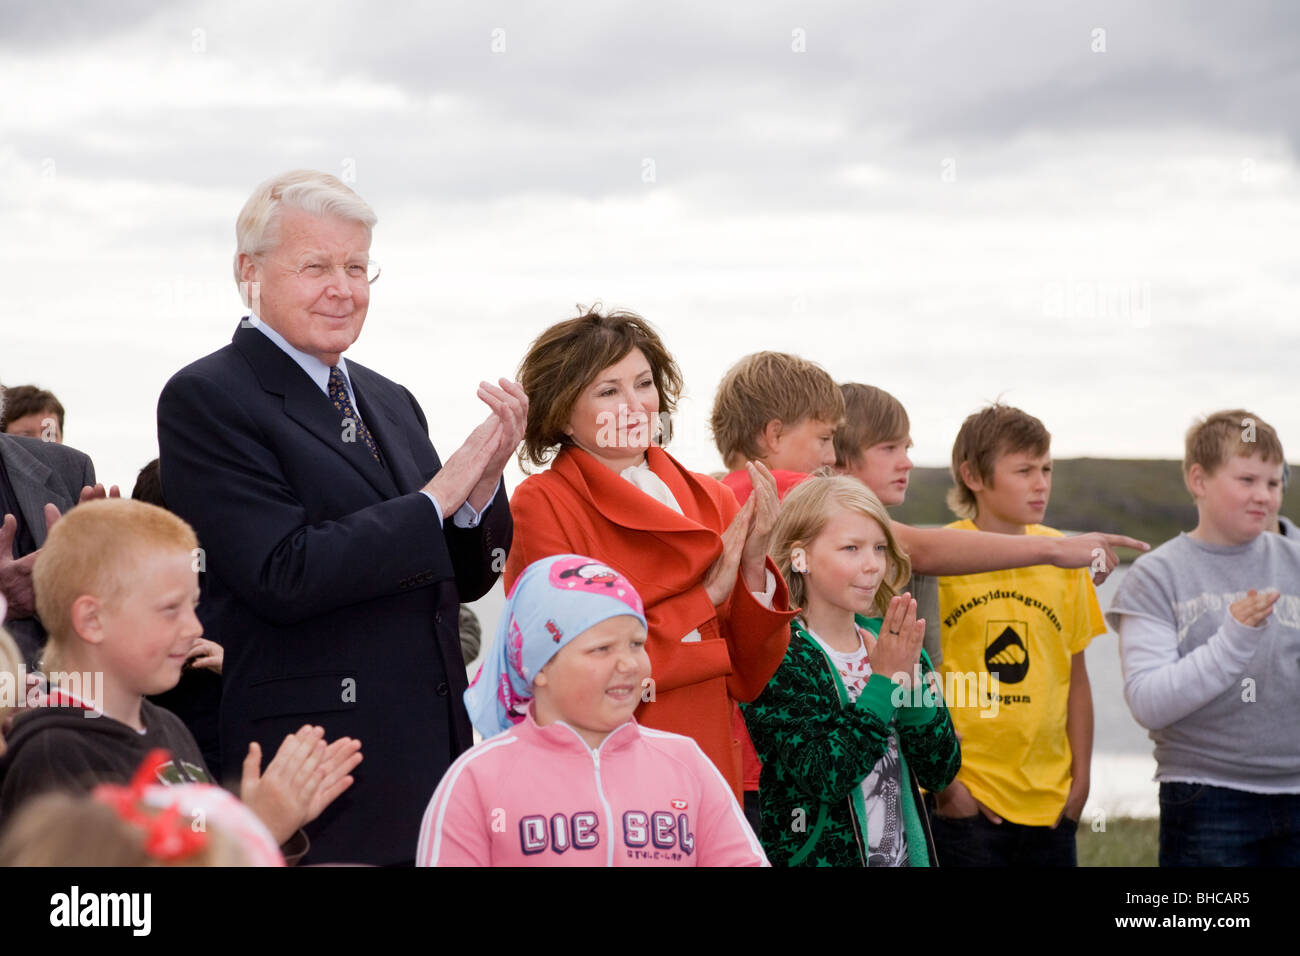 The president of Iceland, Olafur Ragnar Grimsson and Iceland's First Lady, Dorrit Moussaieff, unveil a monument ... Stock Photo